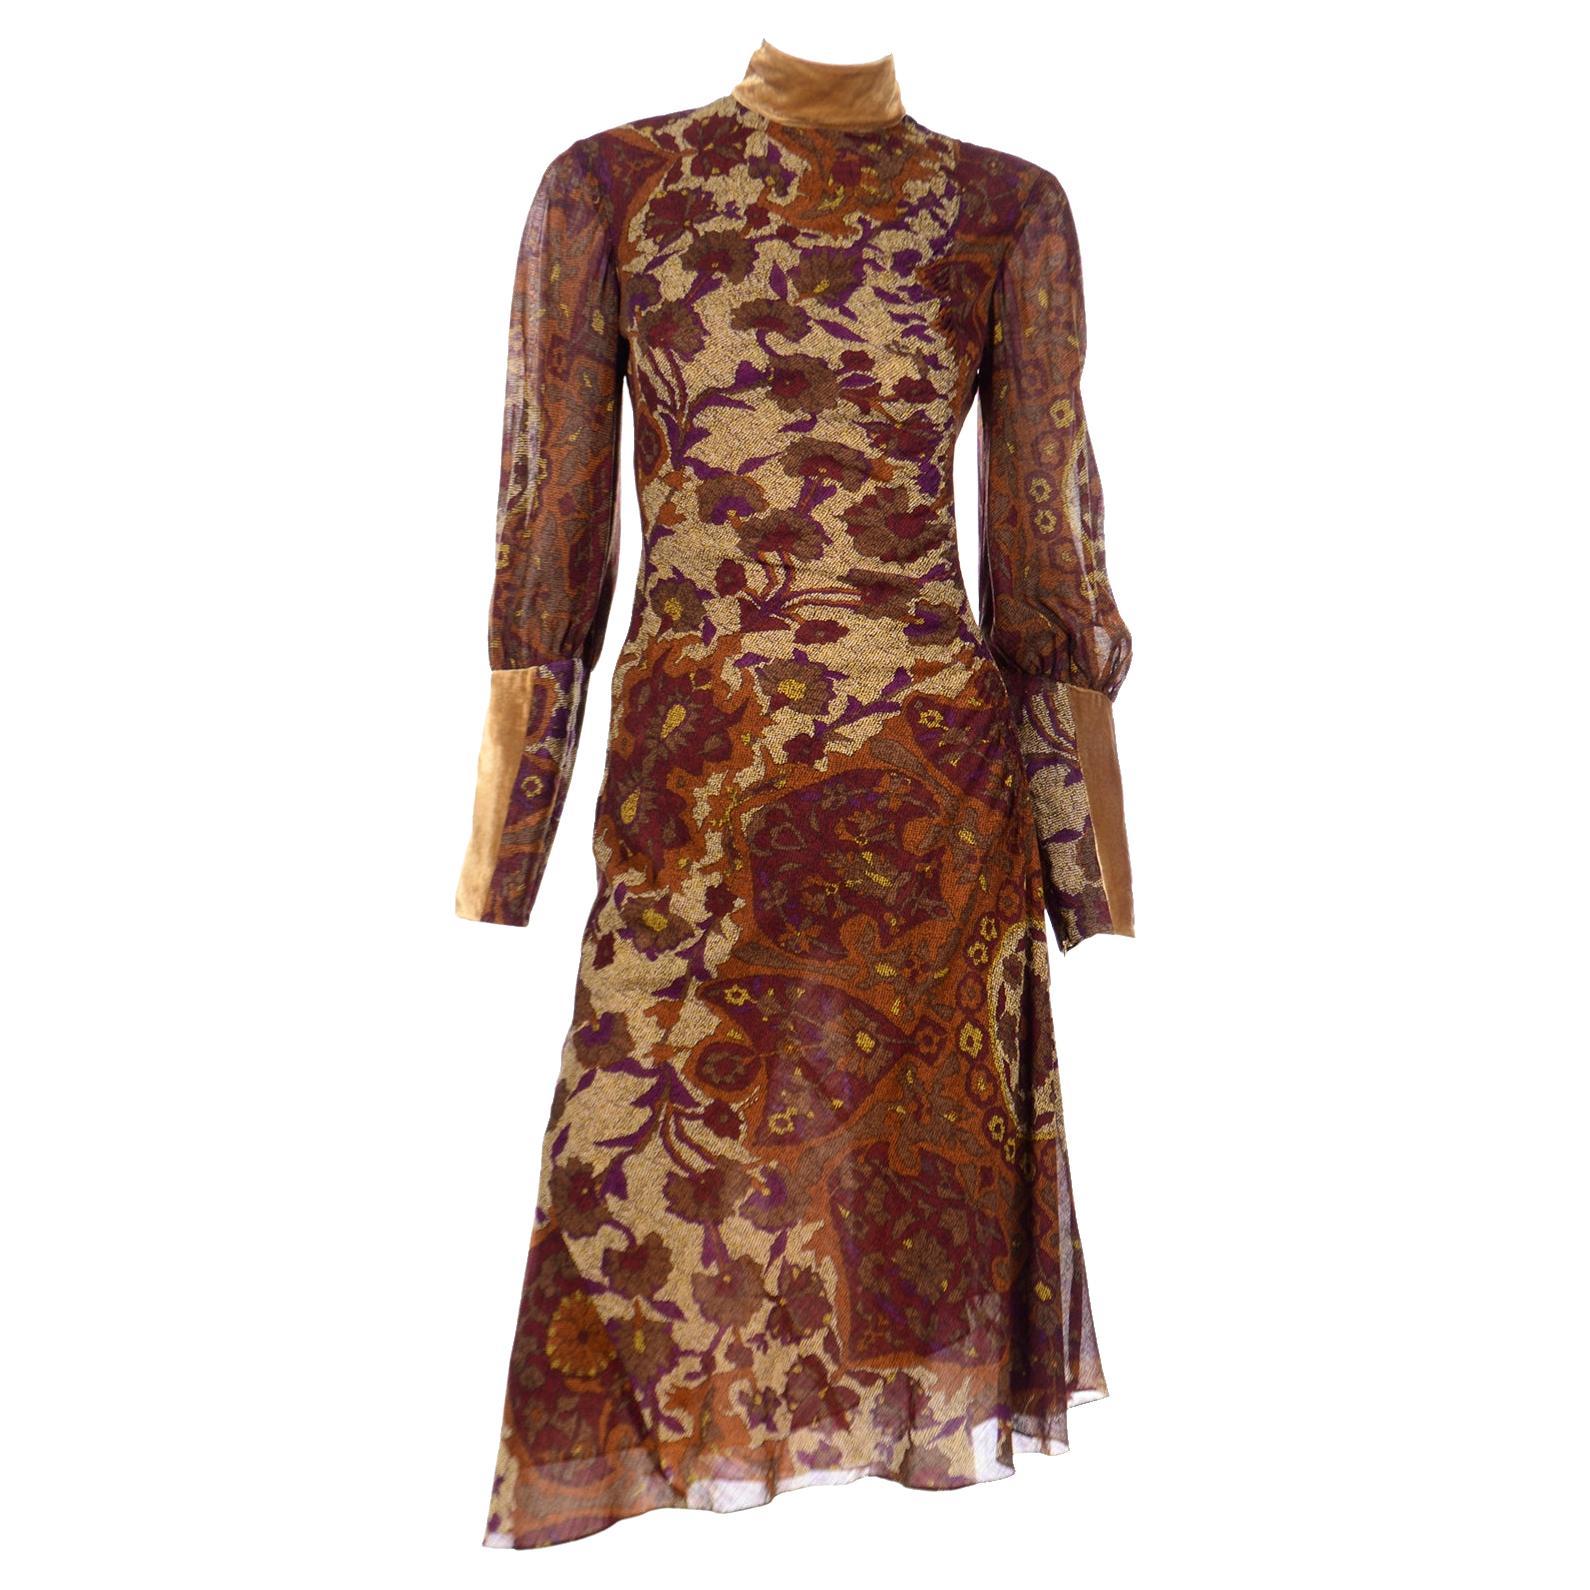 Kenzo Vintage Lush Plum Brown and Gold Floral Print Dress w Gold Velvet Trim For Sale